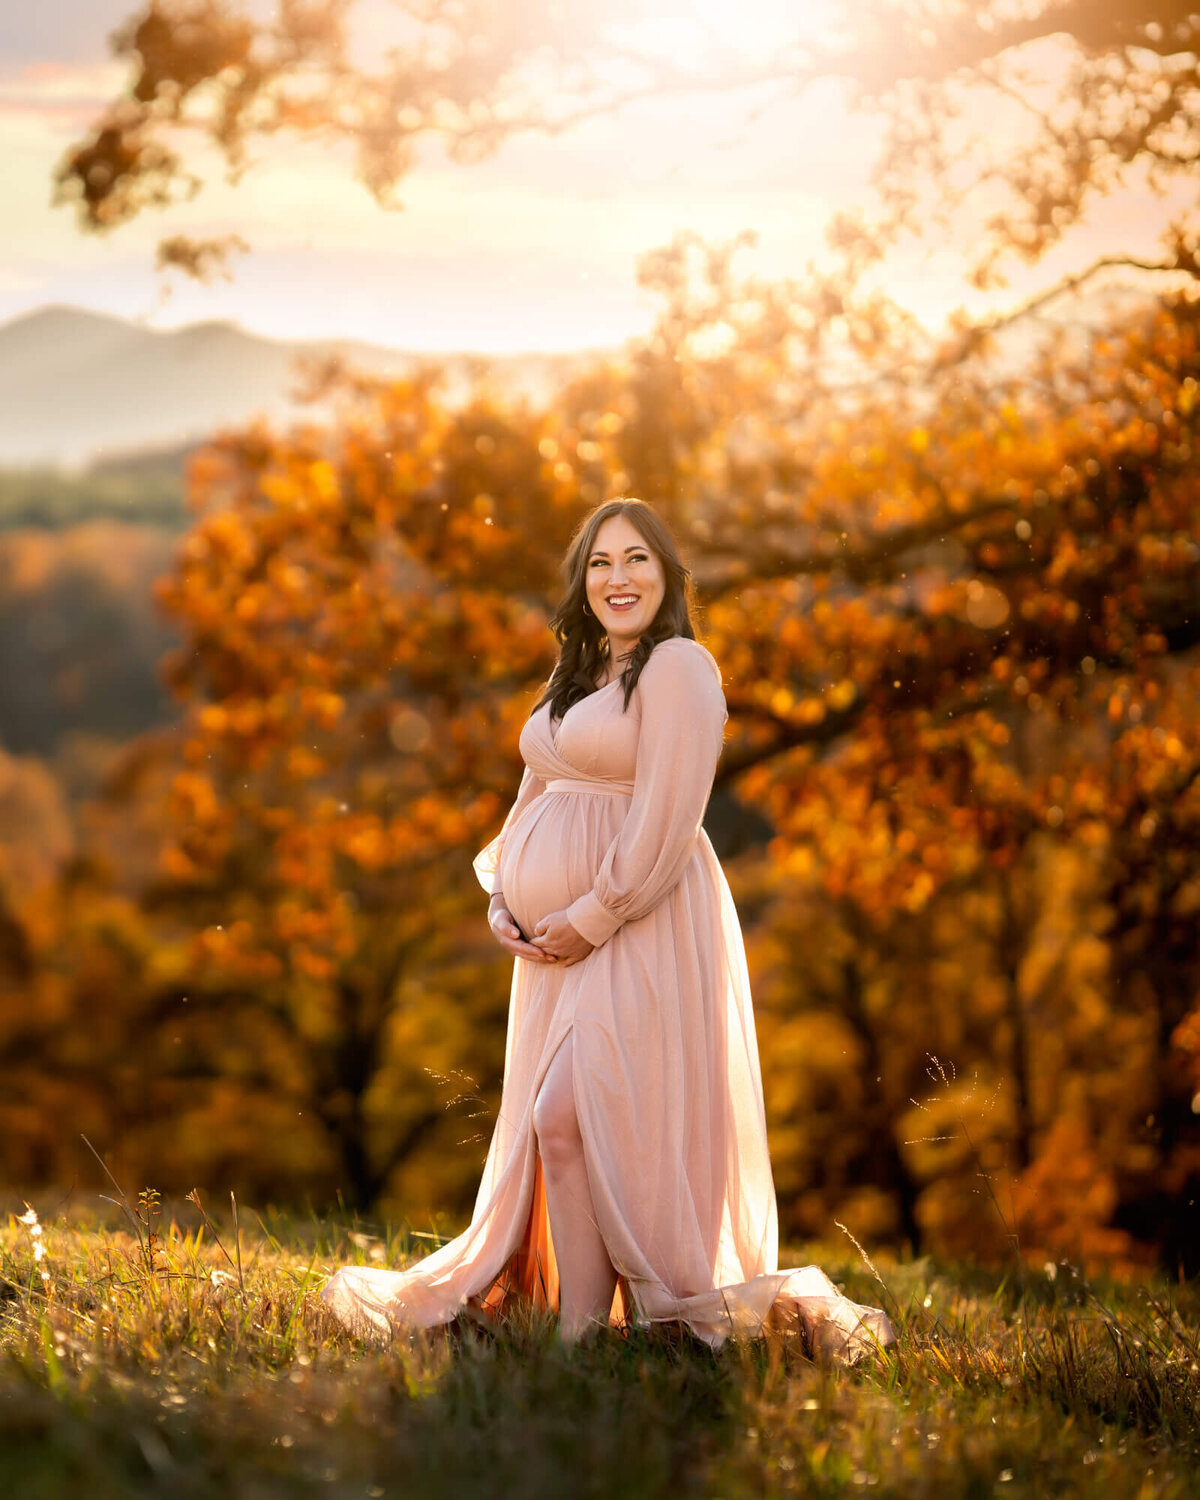 A beautiful mama to be cradles her baby bump while standing in the grass in a long pink dress while the sun sets behind her